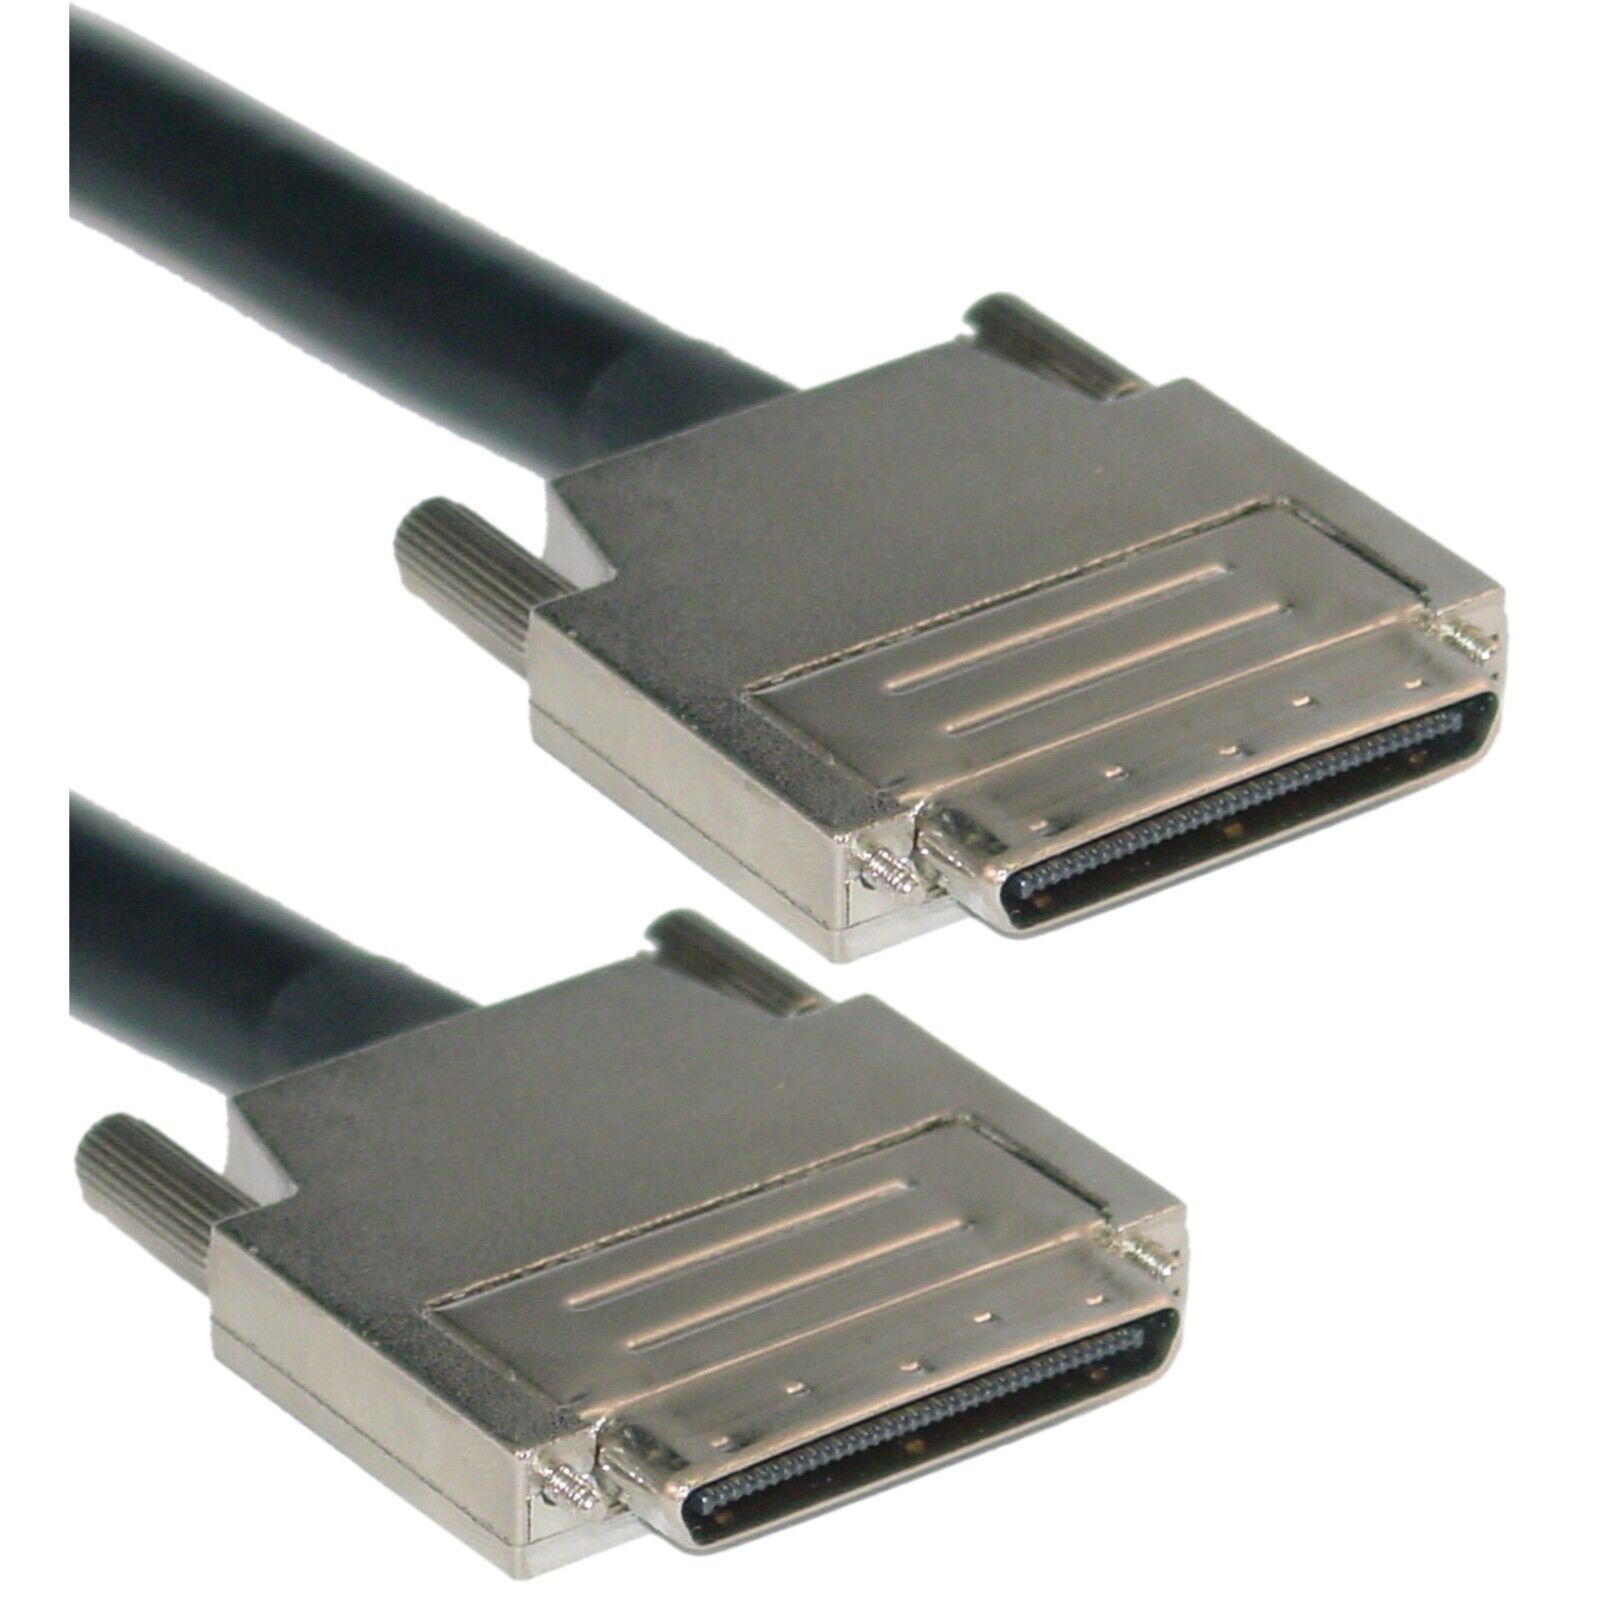 6FT  0.8 mm/0.8 mm VHDCI 0.8mm SCSI Cable  PID 709